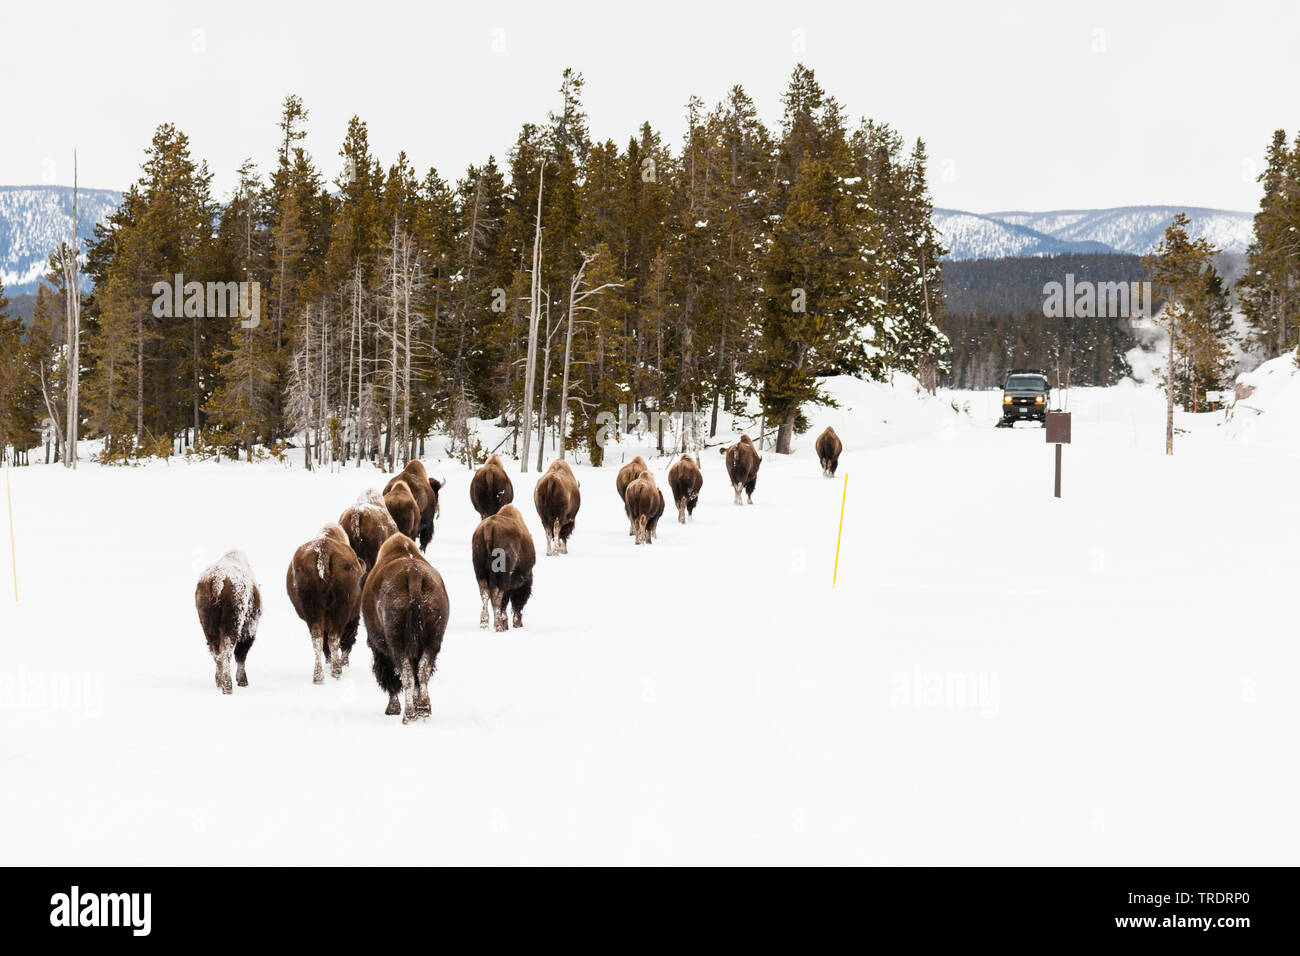 American bison, buffalo (Bison bison), herd walking in the snow-covered Yellowstone National Park, USA, Wyoming, Yellowstone National Park Stock Photo